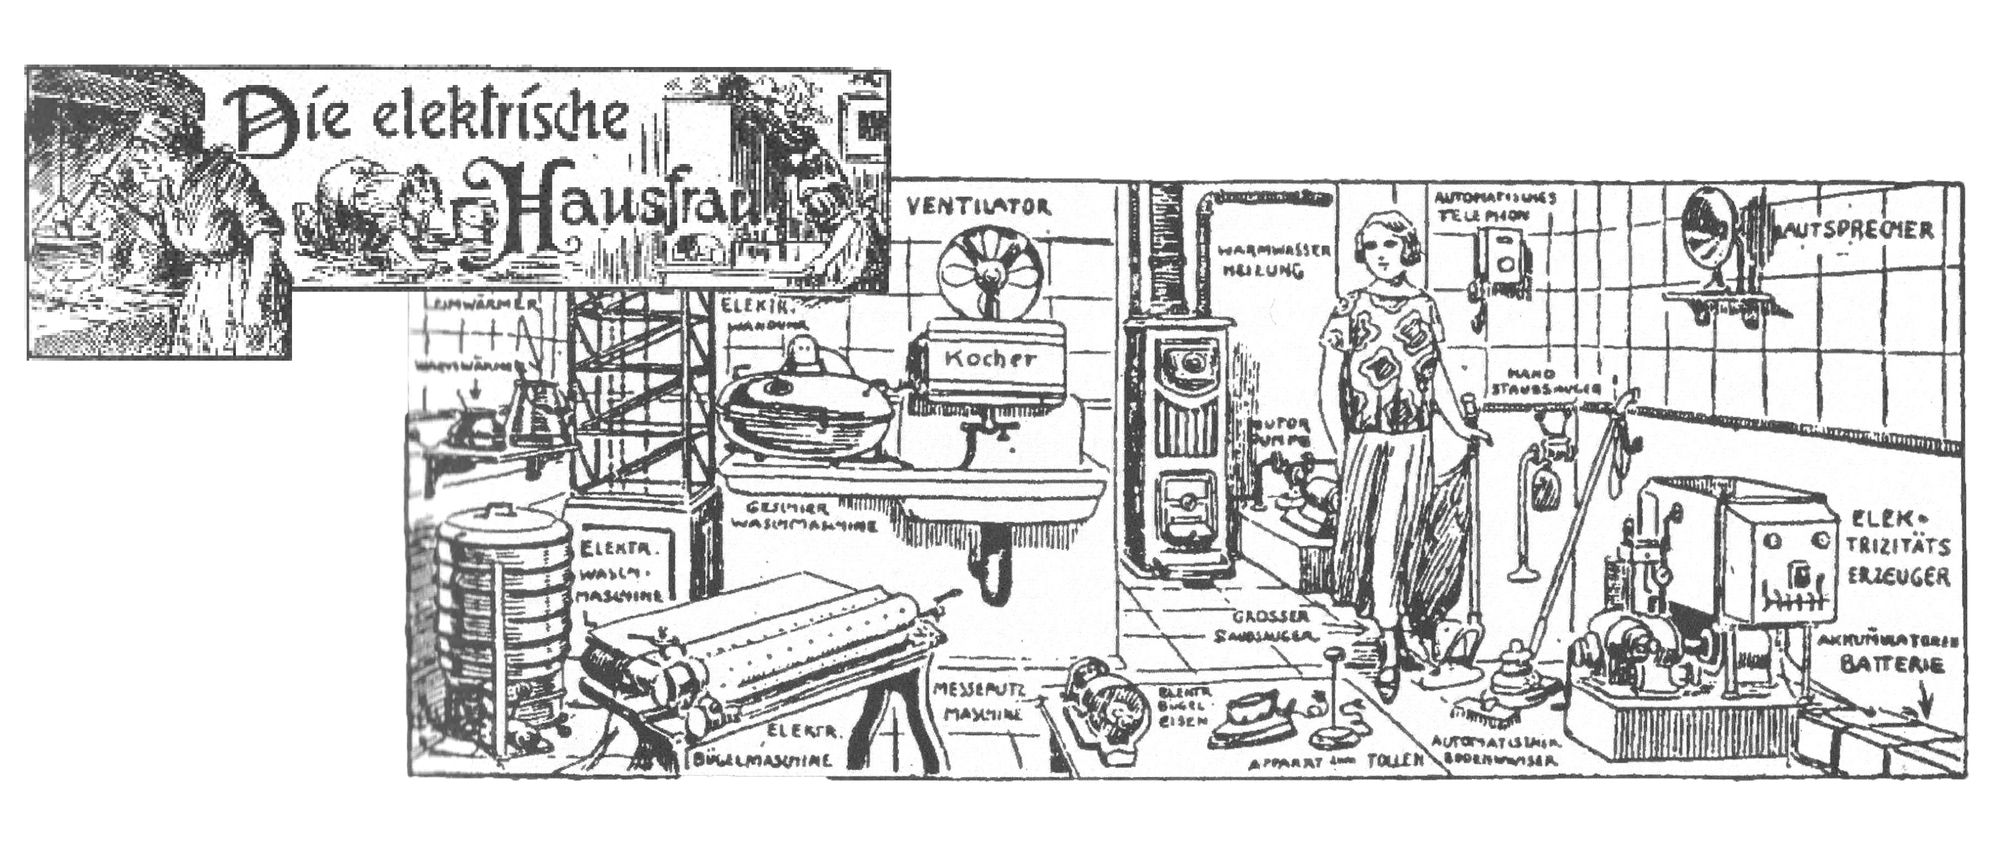 On the left: the lettering "the electrical housewife" surrounded by drawings of a woman in an apron and headscarf cooking on an open stove and scrubbing the floor on her knees. On the right: A drawing of a well-equipped kitchen with all imaginable household appliances. In the centre of the picture is a woman dressed in the modern style of the 1920s.  